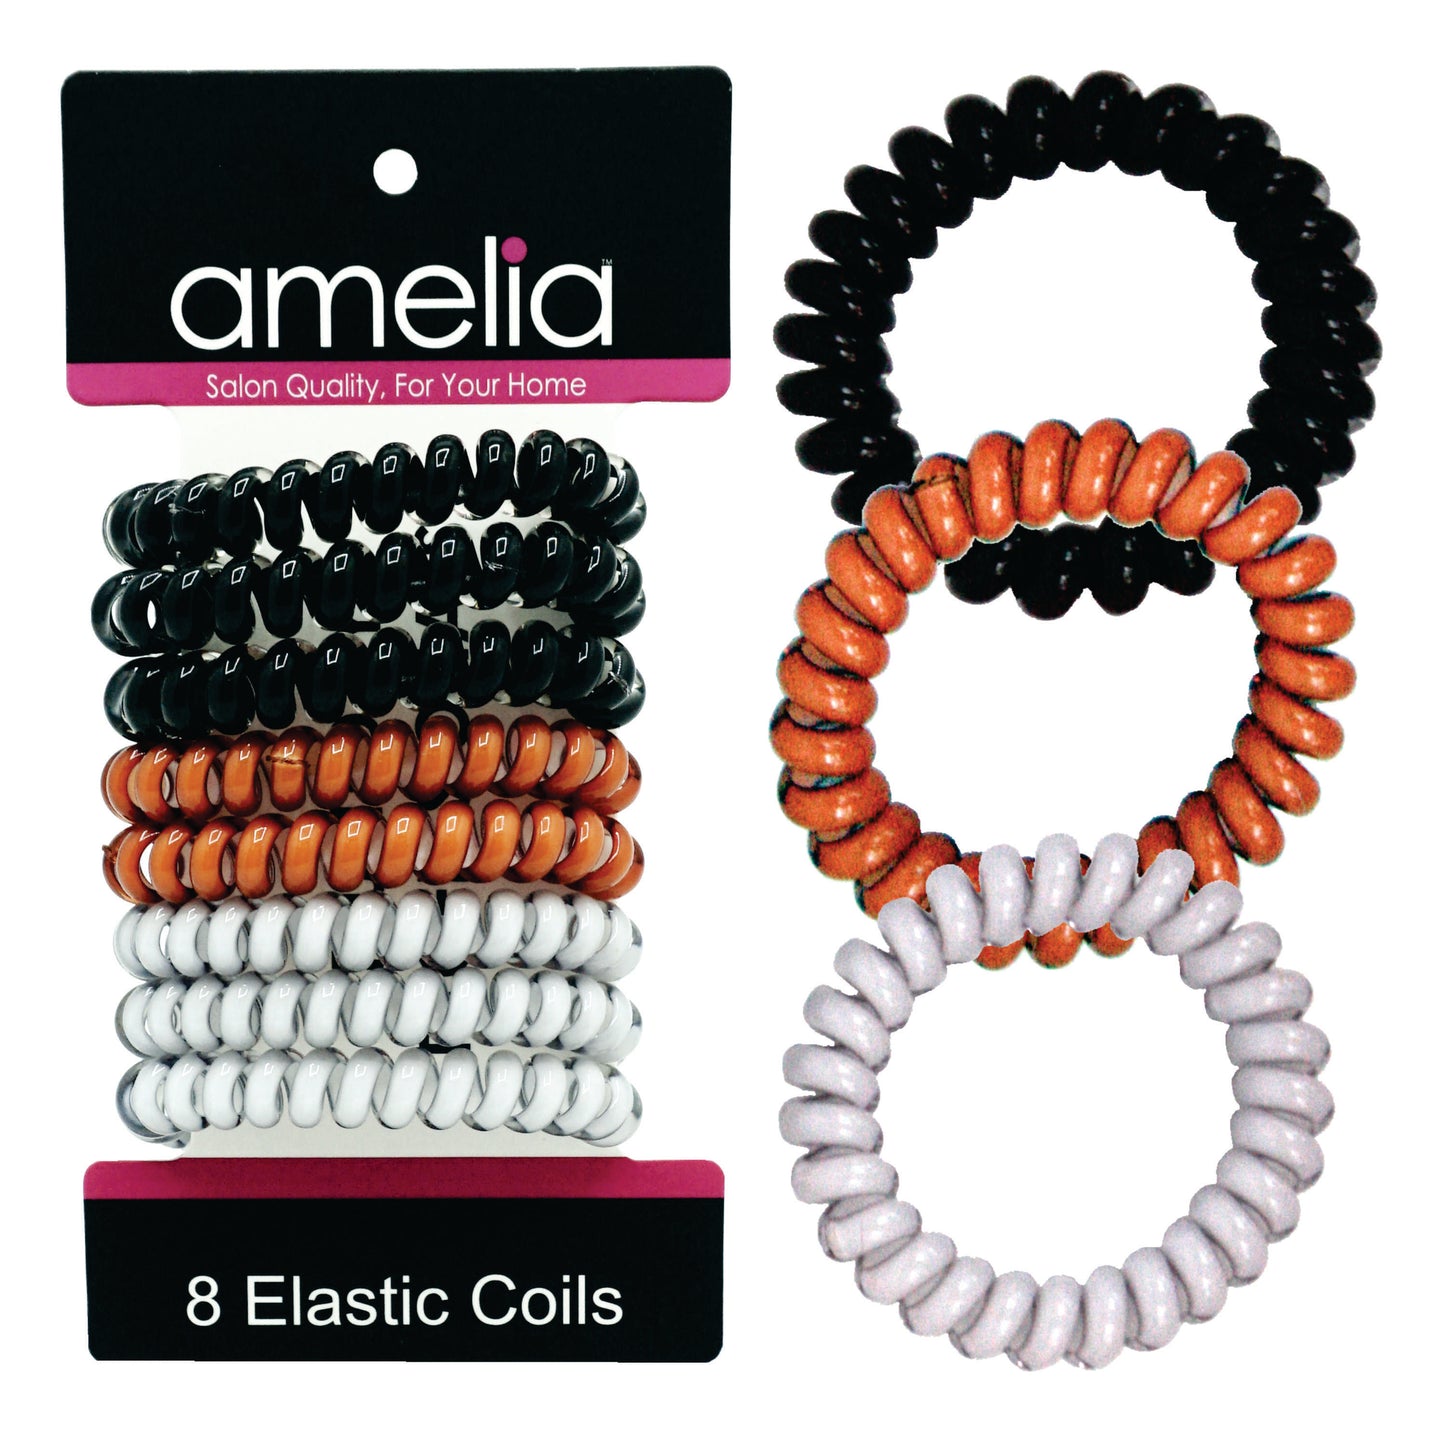 Amelia Beauty Products 8 Medium Elastic Hair Coils, 2.0in Diameter Thick Spiral Hair Ties, Gentle on Hair, Strong Hold and Minimizes Dents and Creases, Earth Tones Blend